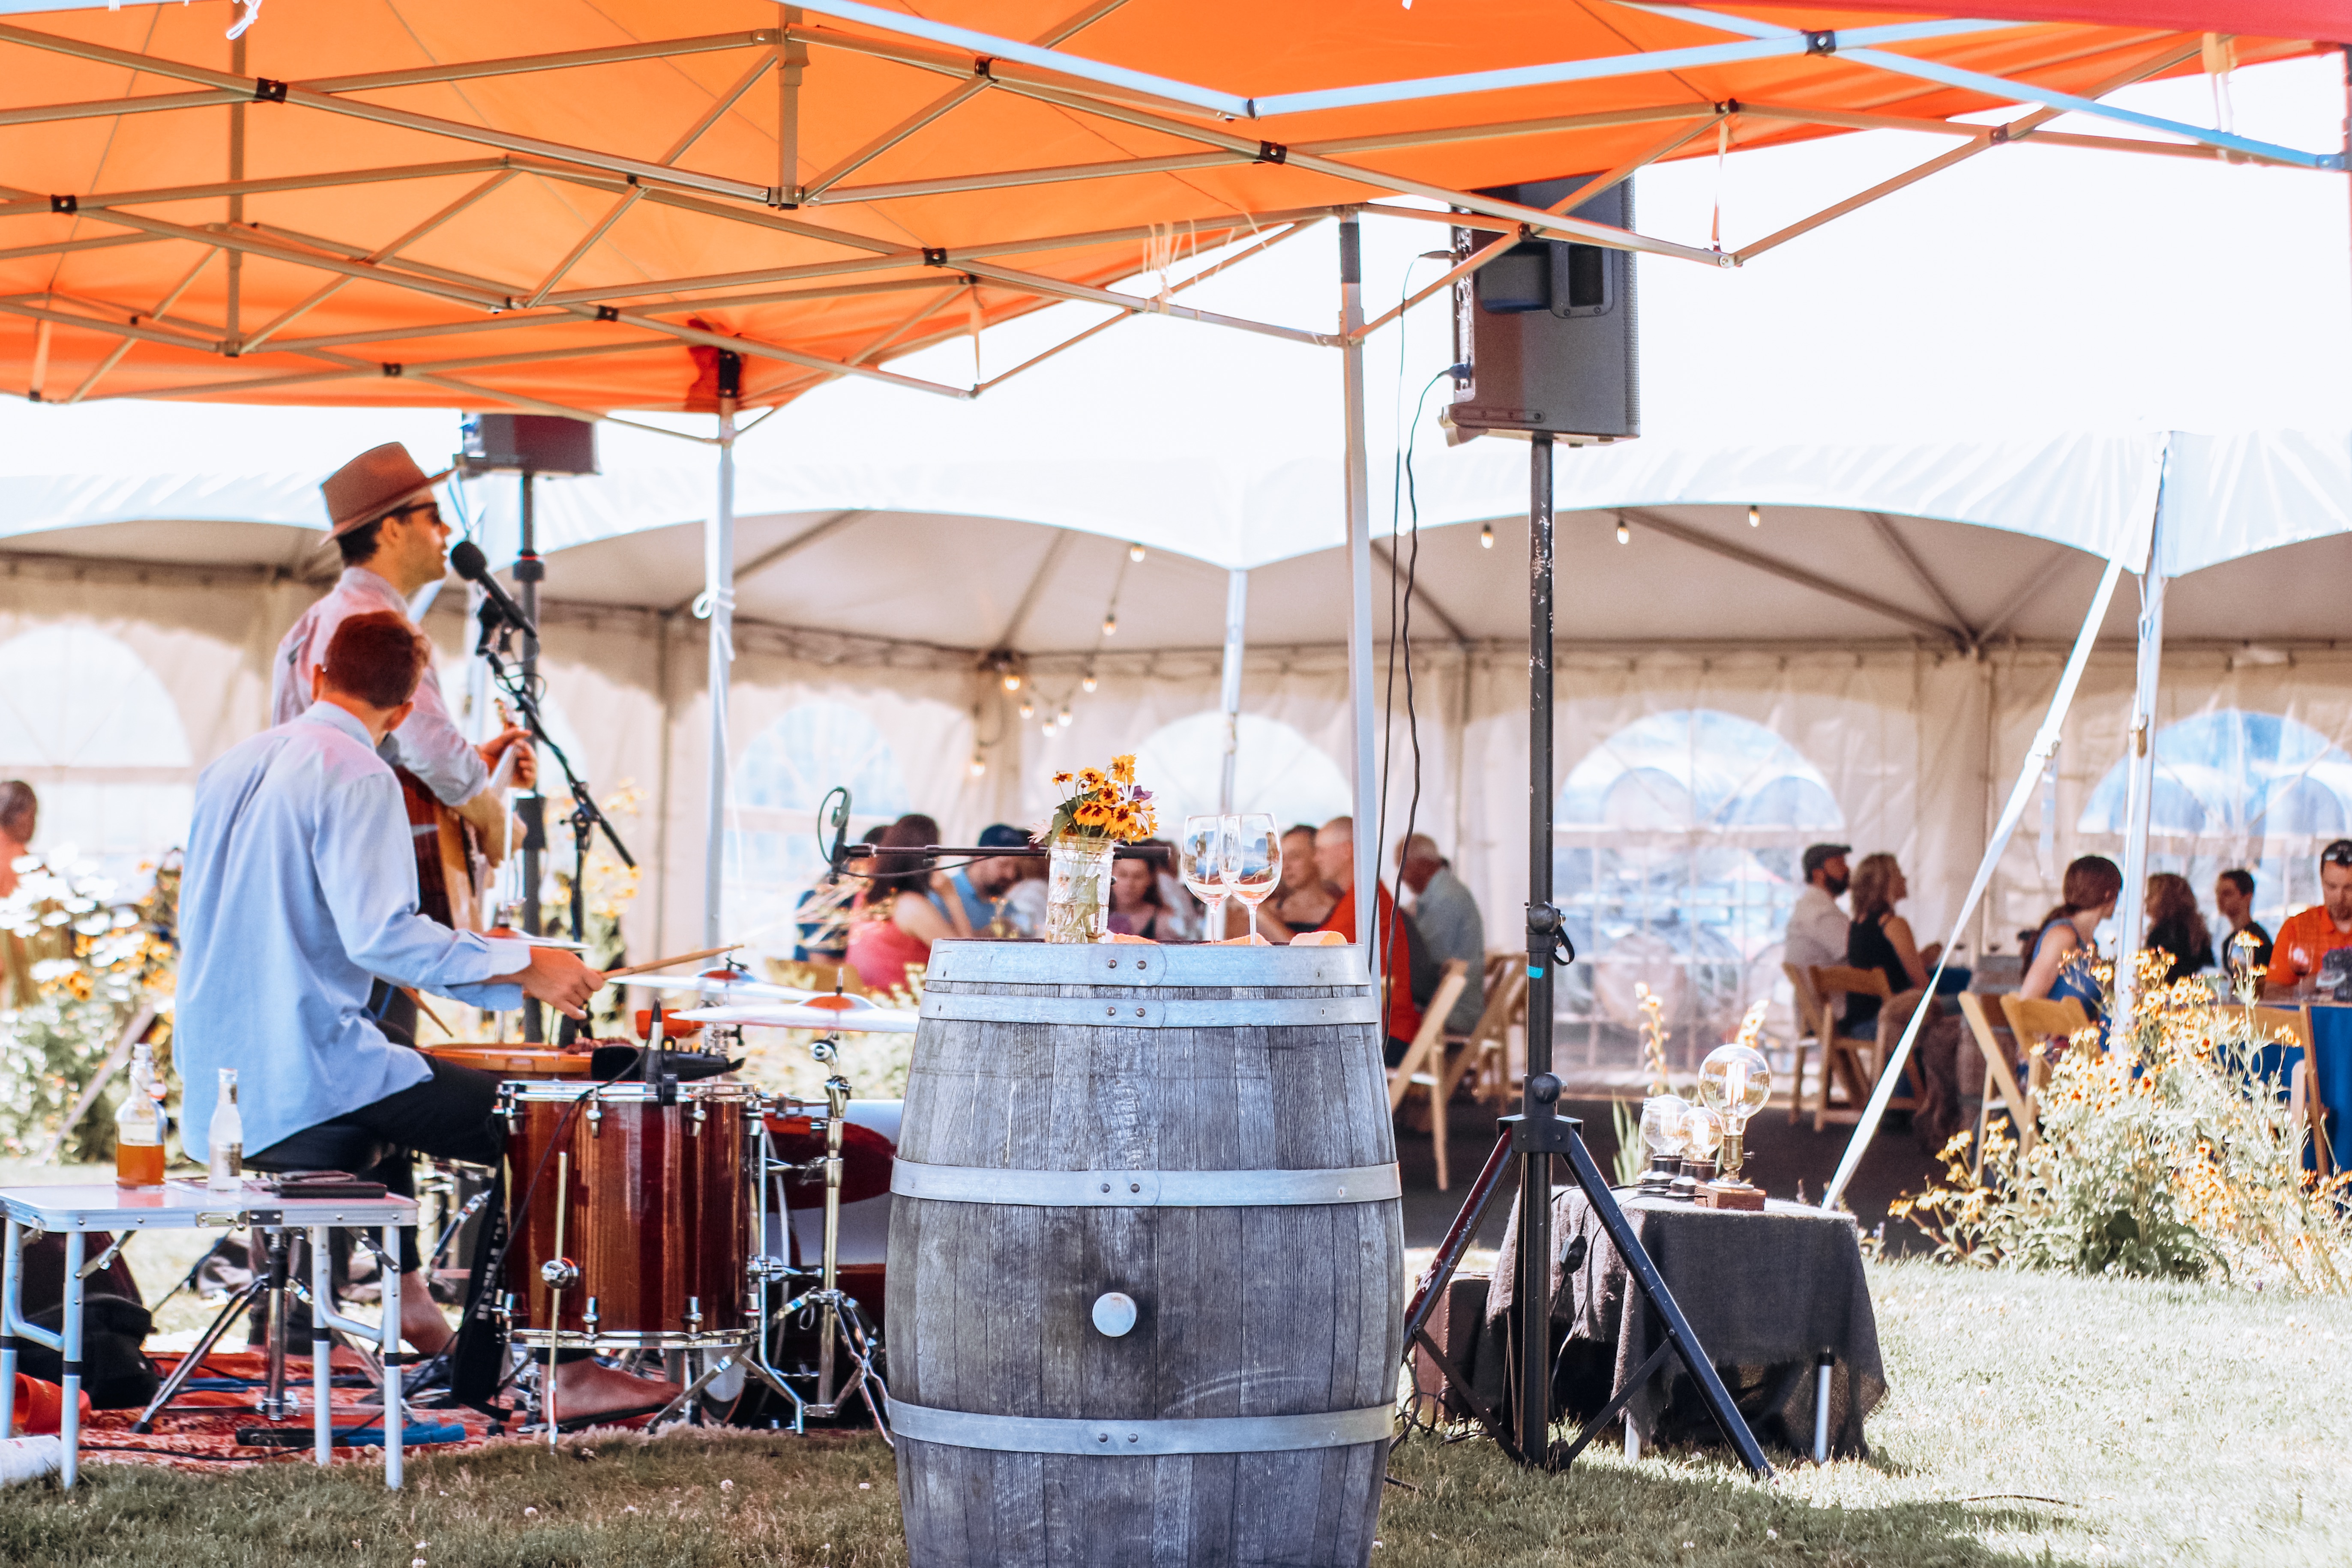 A concert takes place on the lawn at our Estate Tasting Room location under a large tent. In the foreground, a guitarist sings into a microphone while a drummer is mid-hit. In the background, several groups of people are seated at large banquet tables enjoying food and wine.